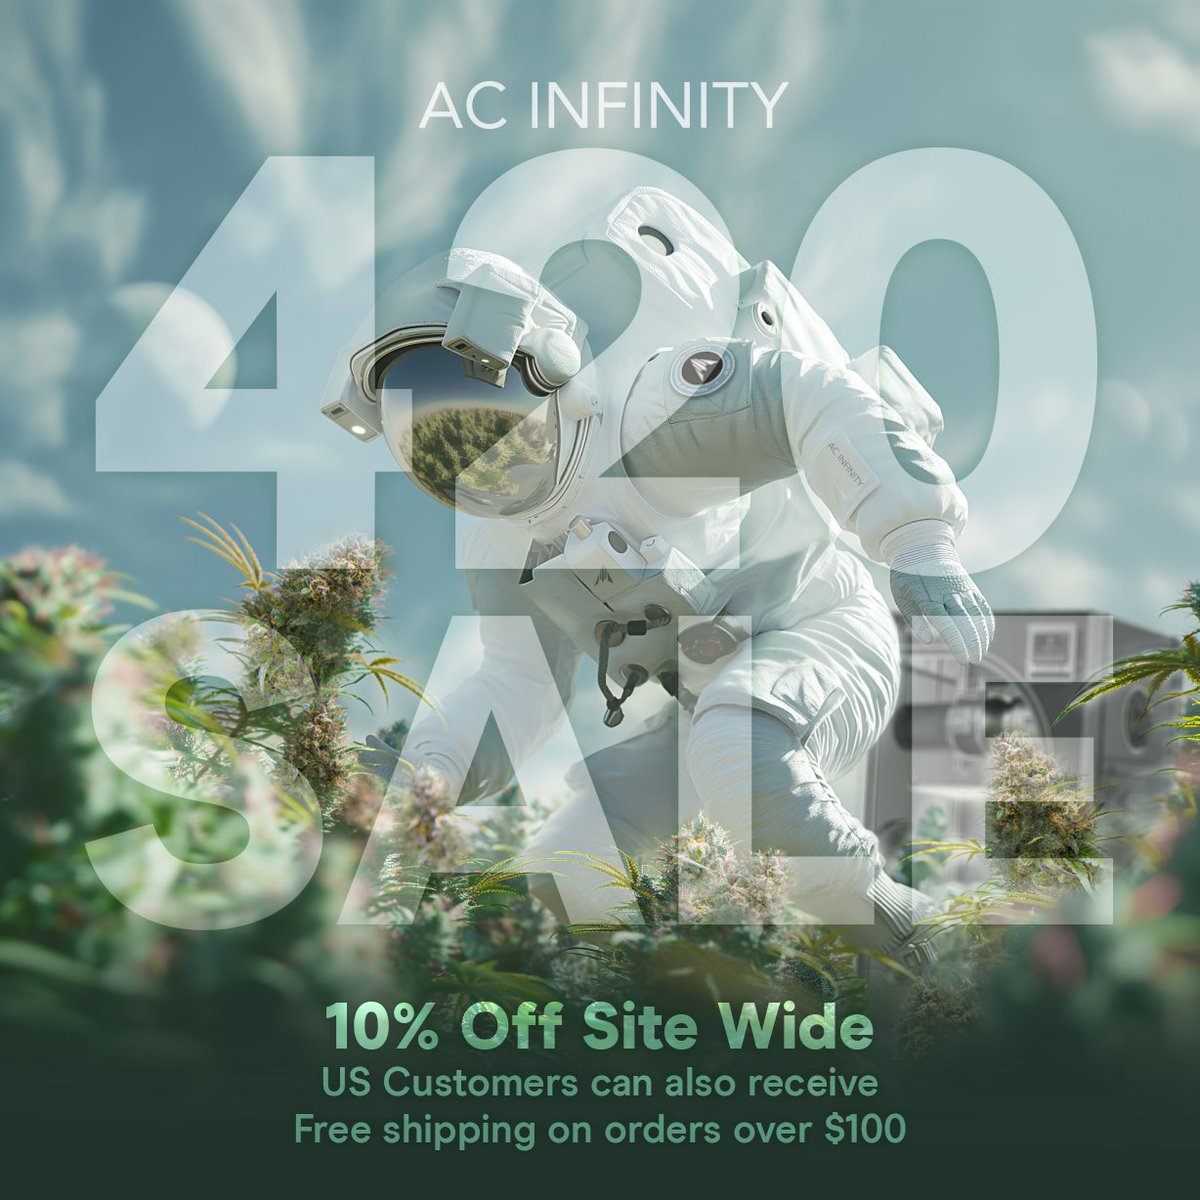 Our 420 sale is going on today April 19 and tomorrow April 20! Take advantage of the extra savings🤑 acinfinity.com Sale ends on April 20 at 11:59pm PST